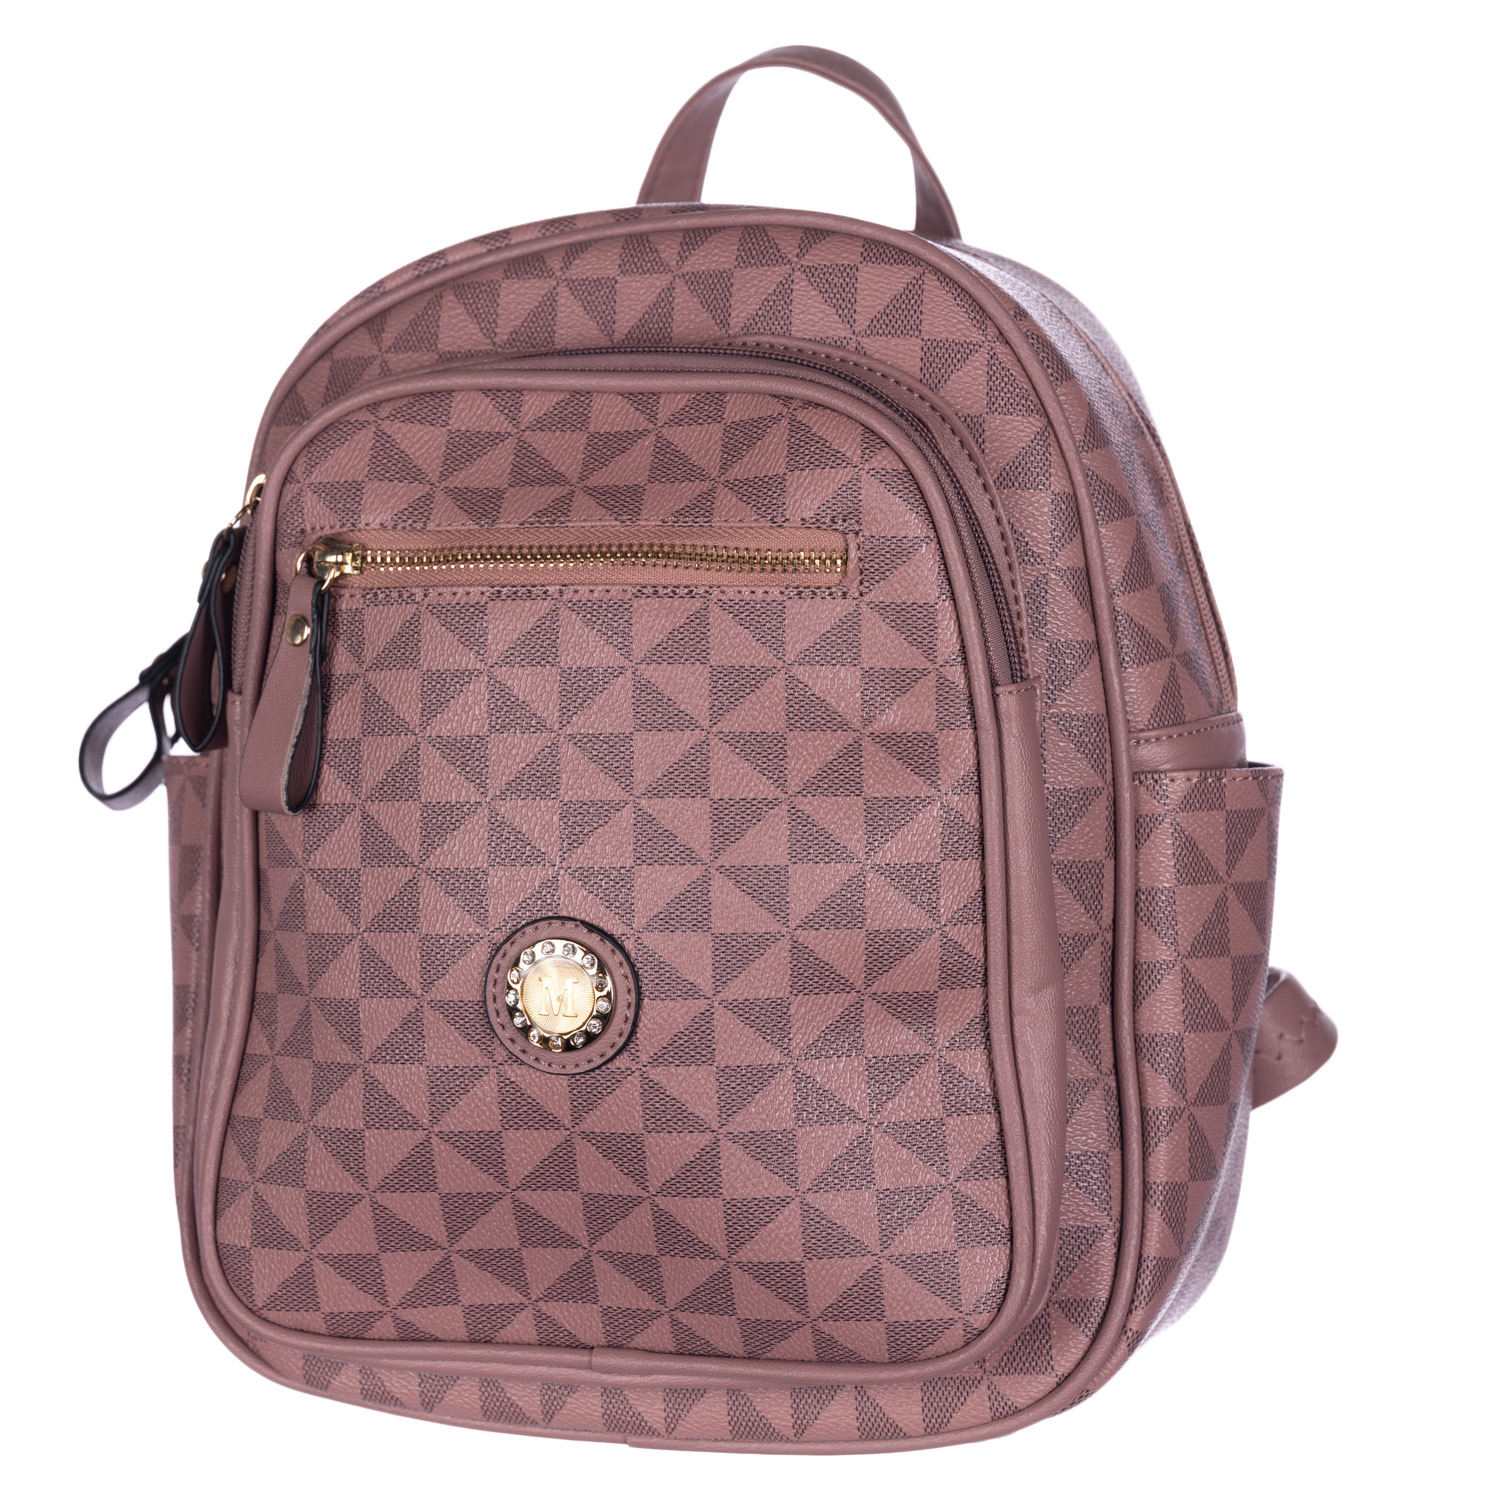 BACKPACK-F9015-PINK